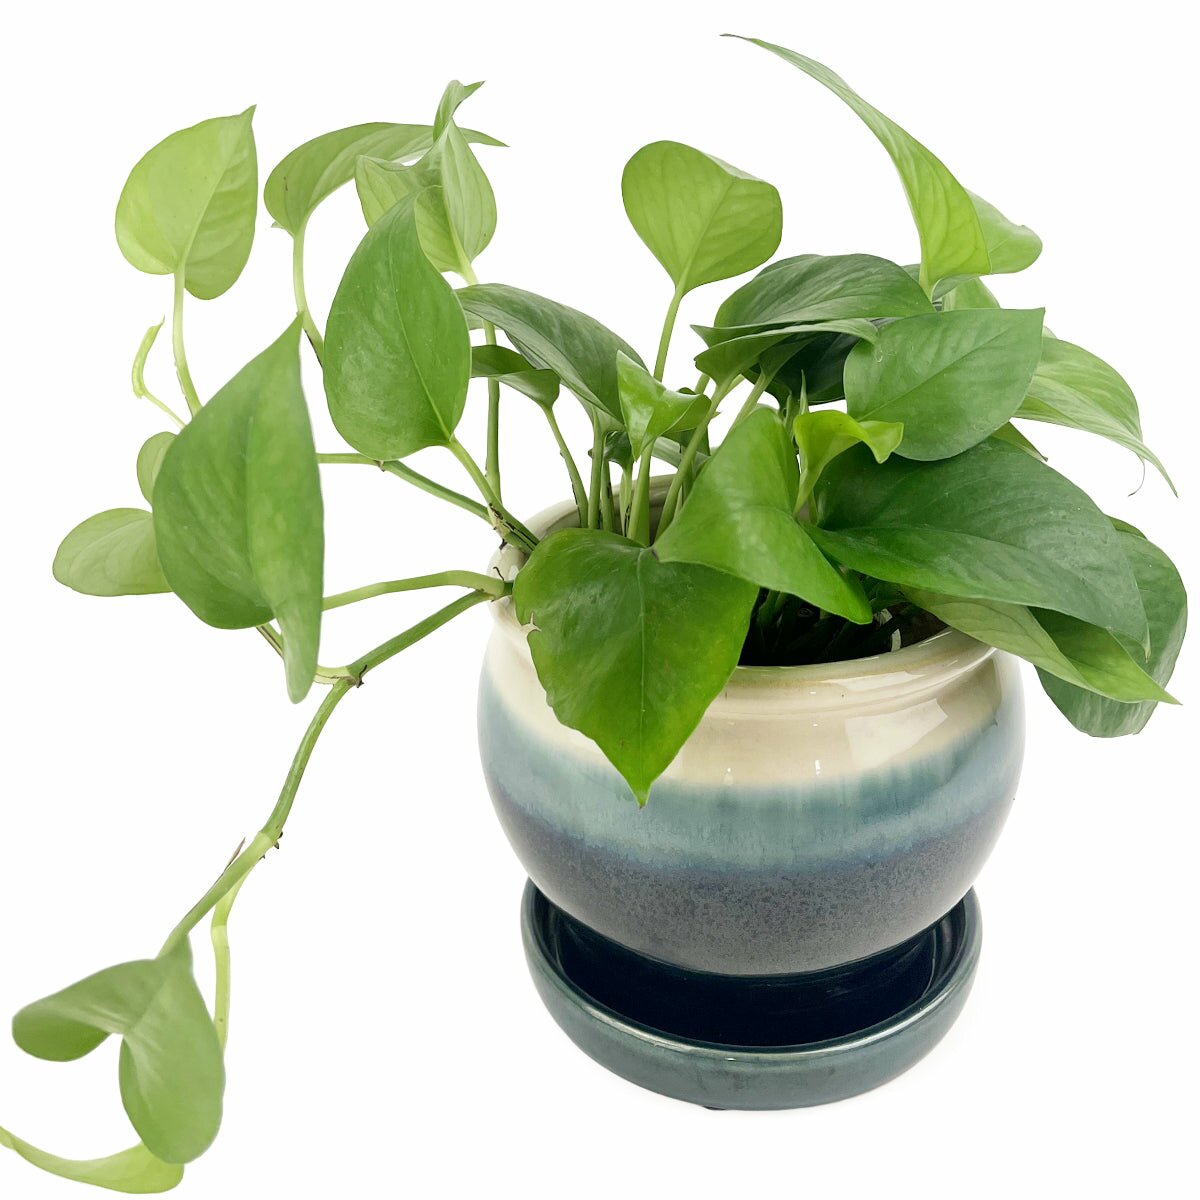 6 inch Aqua Blue Geo Ceramic Planter & Attached Saucer for sale, Buy Houseplant Pot Online, 6 inch ceramic pot for succulents and flowers